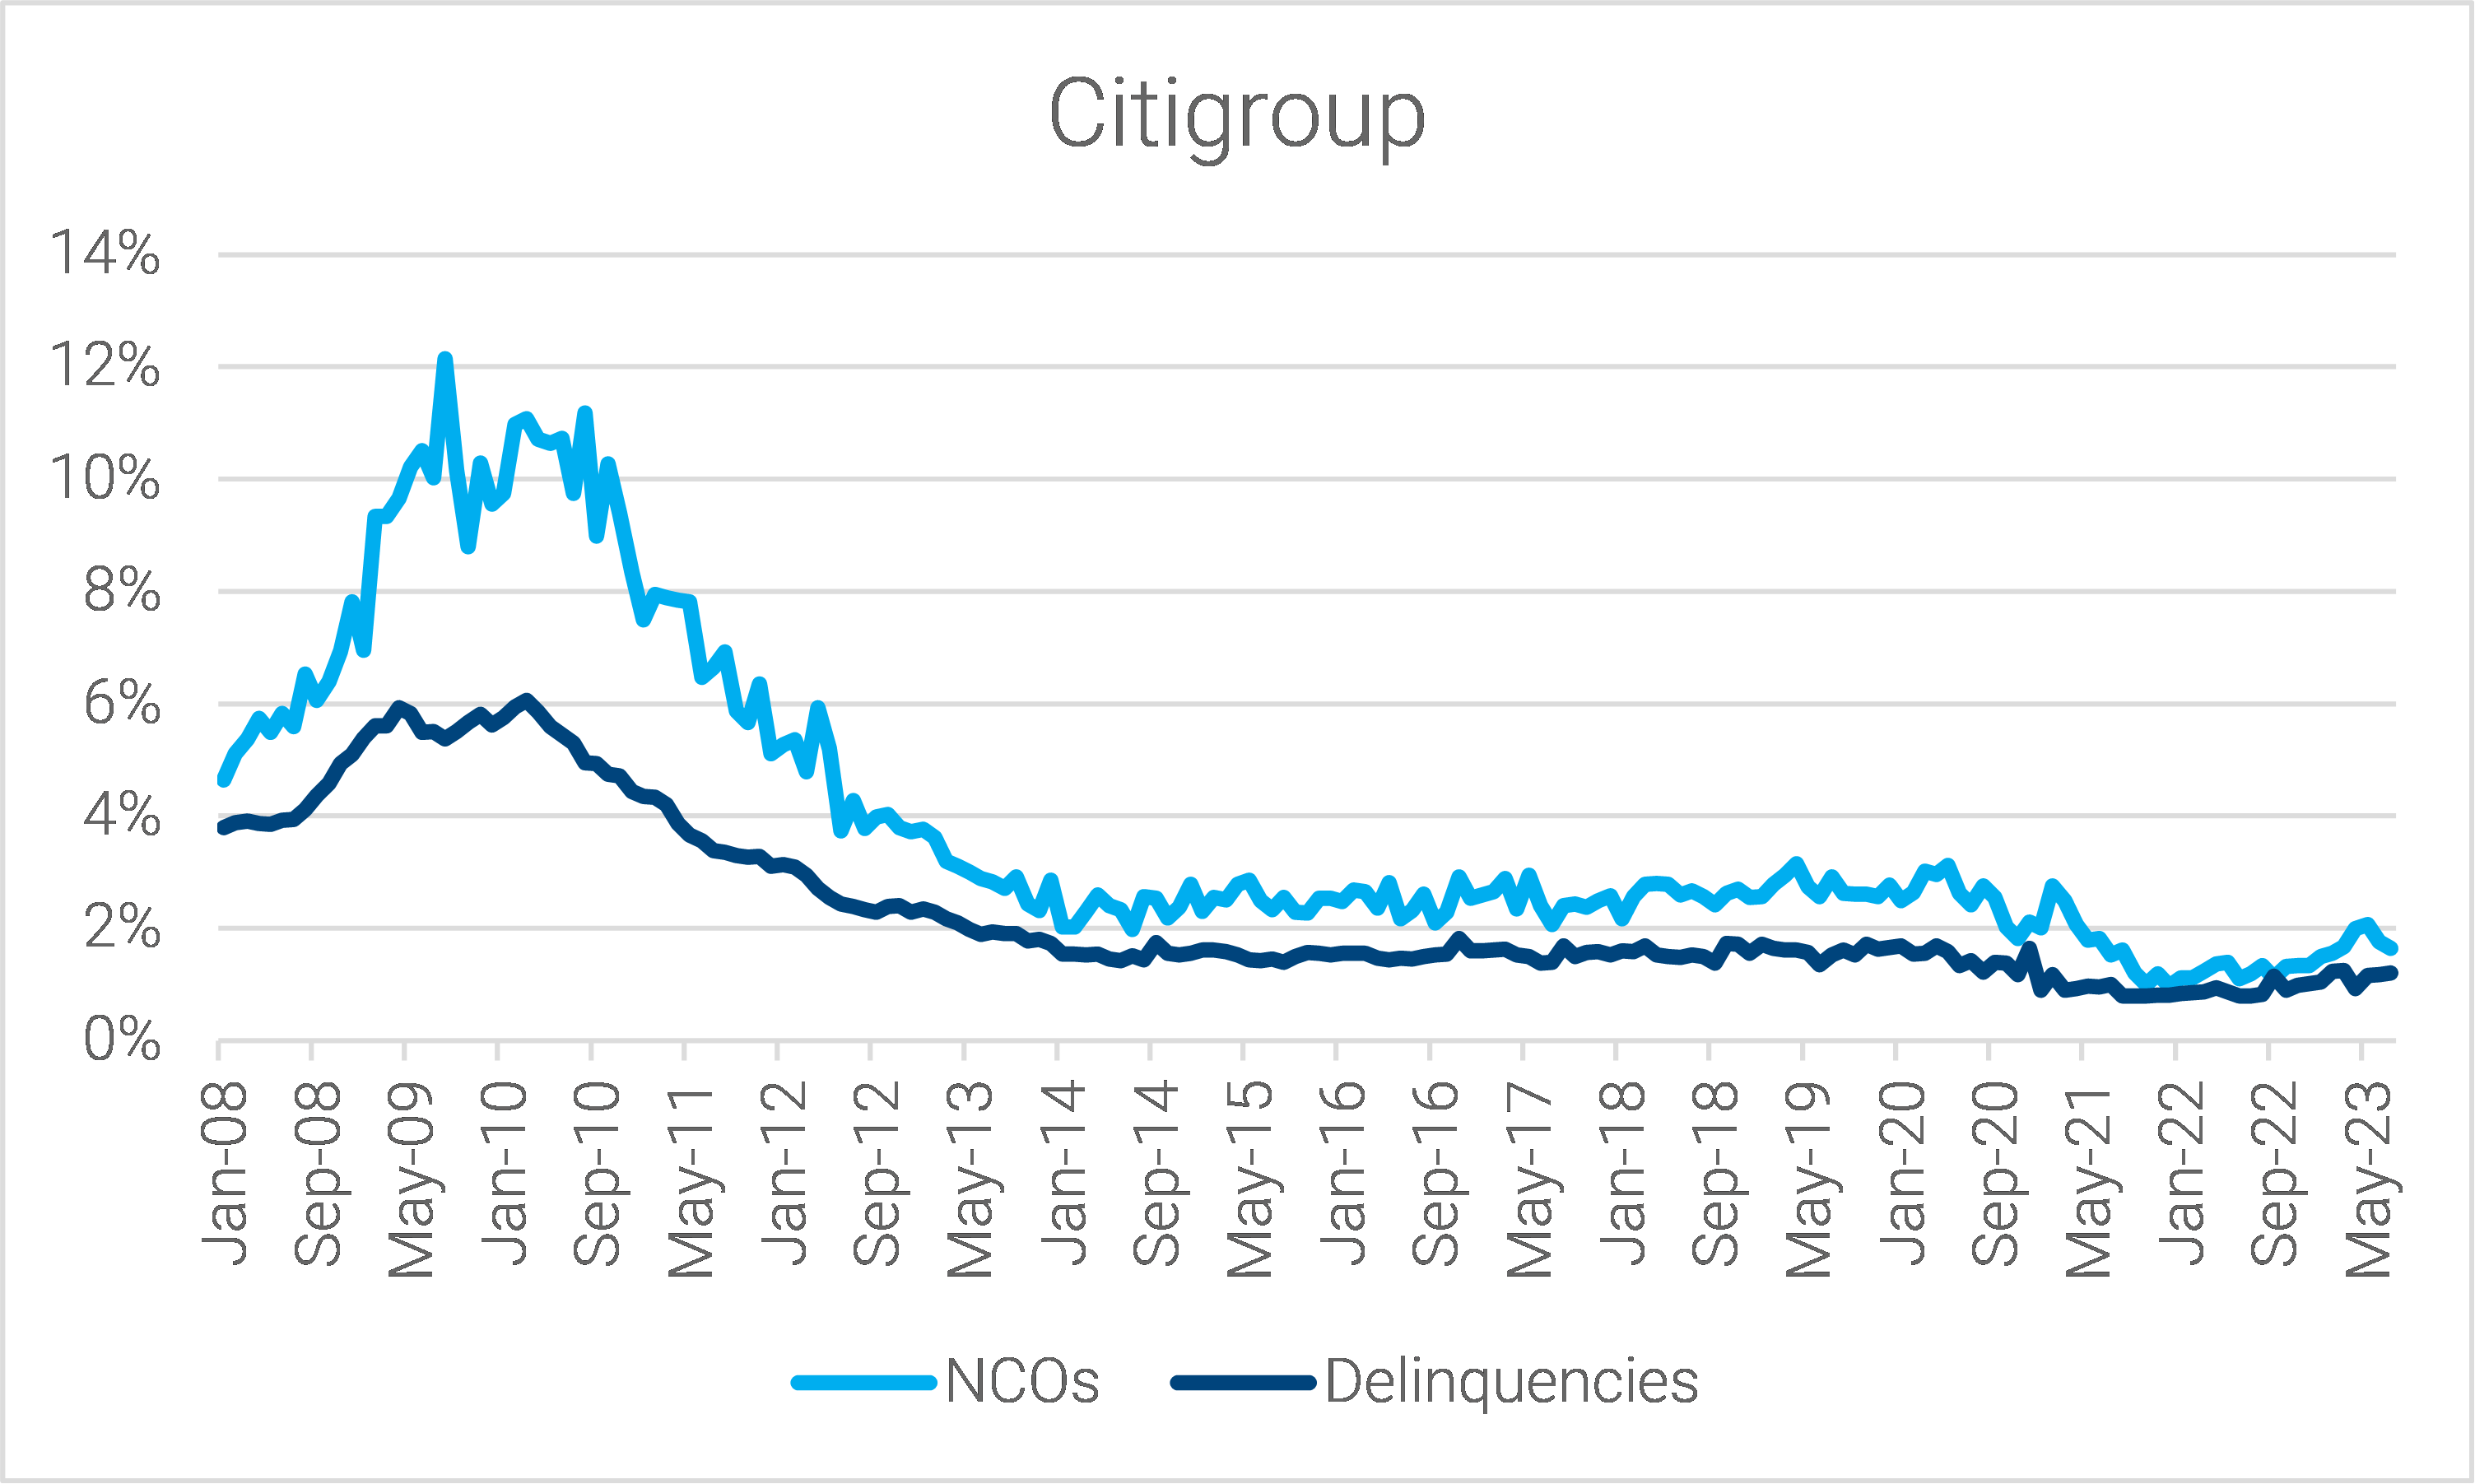 05-citigroup-master-trust-net-charge-off-and-delinquency-rates